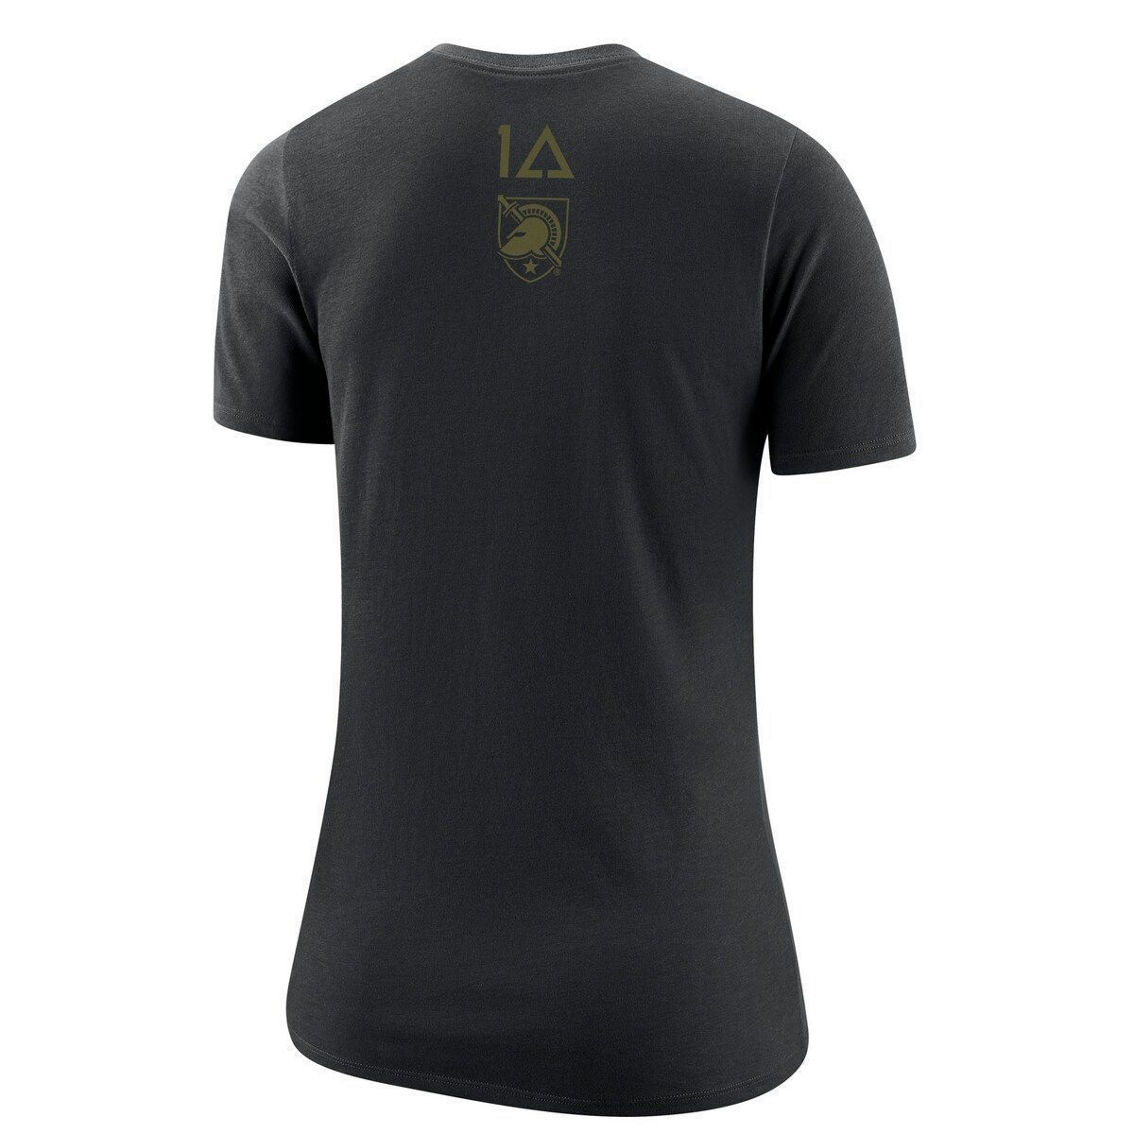 Nike Women's Black Army Black Knights 1st Armored Division Old Ironsides Operation Torch T-Shirt - Image 4 of 4